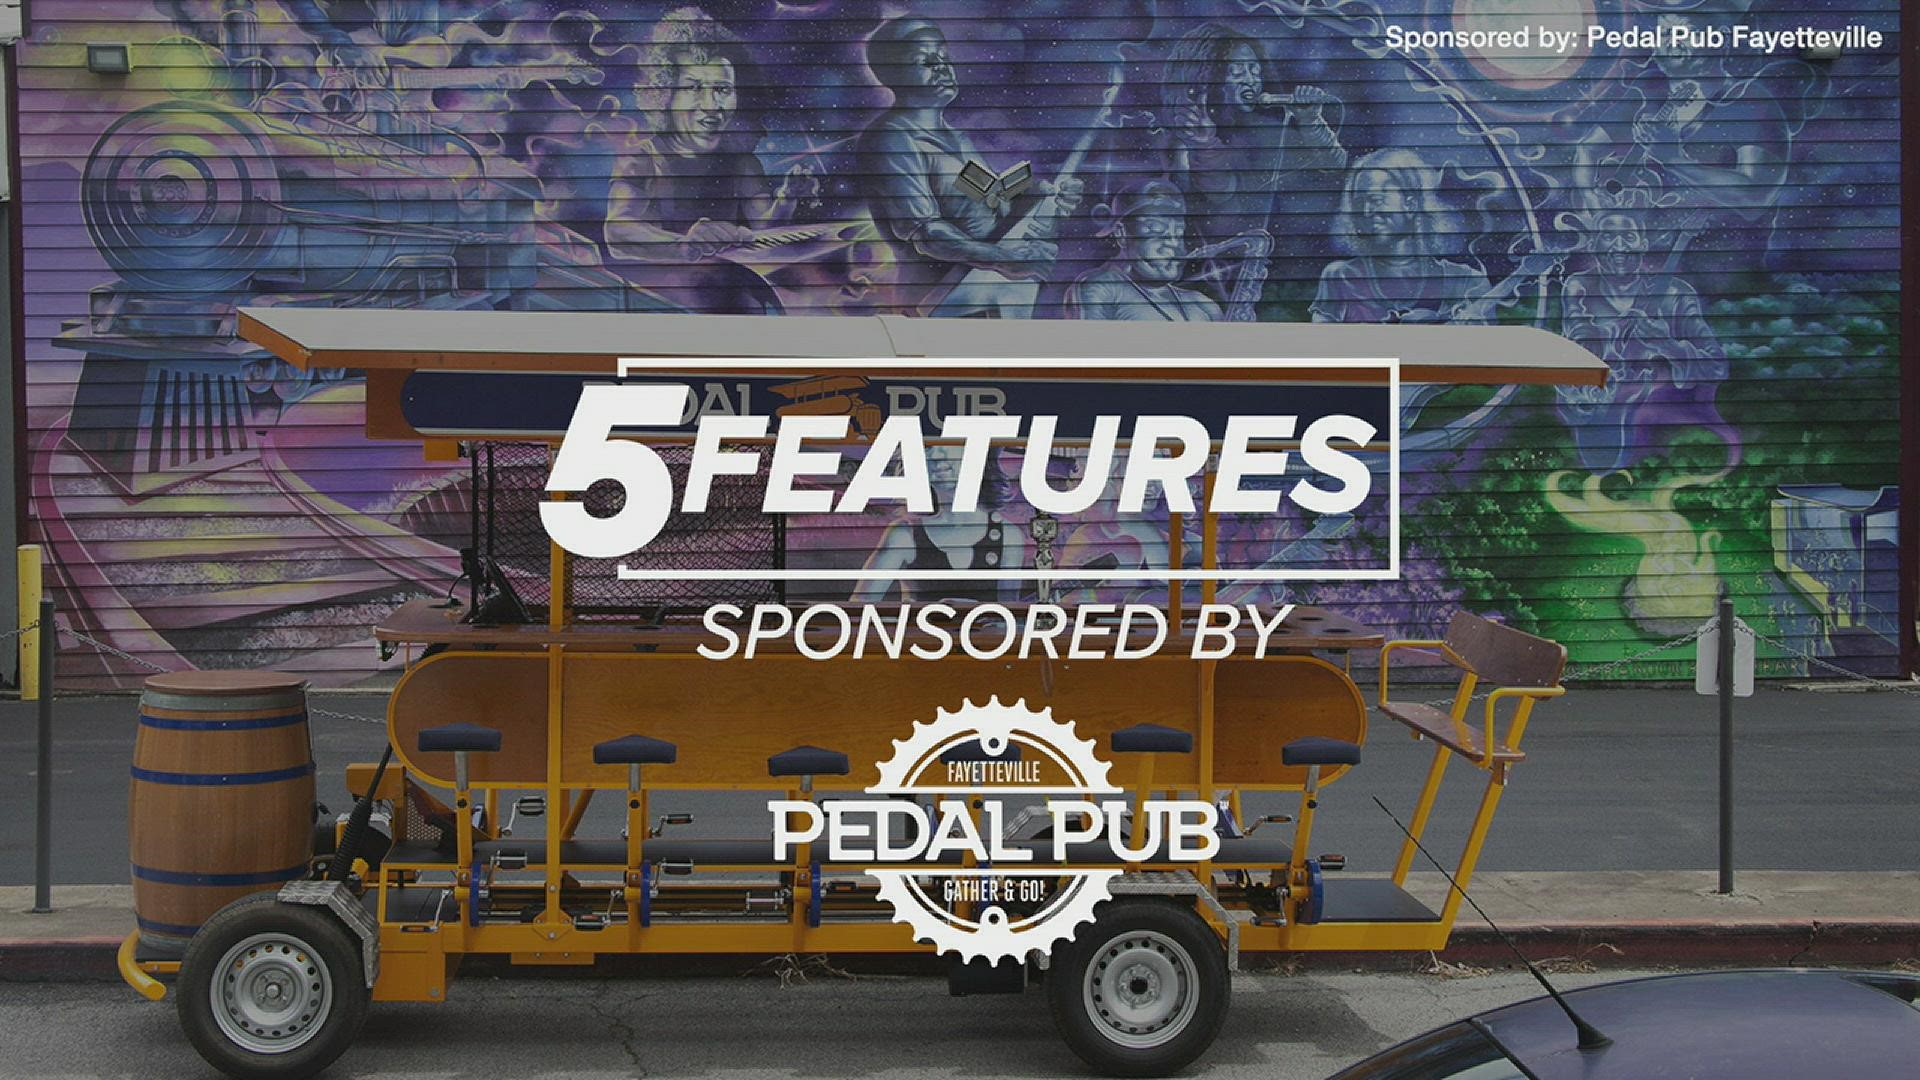 Sponsored by: Pedal Pub Fayetteville